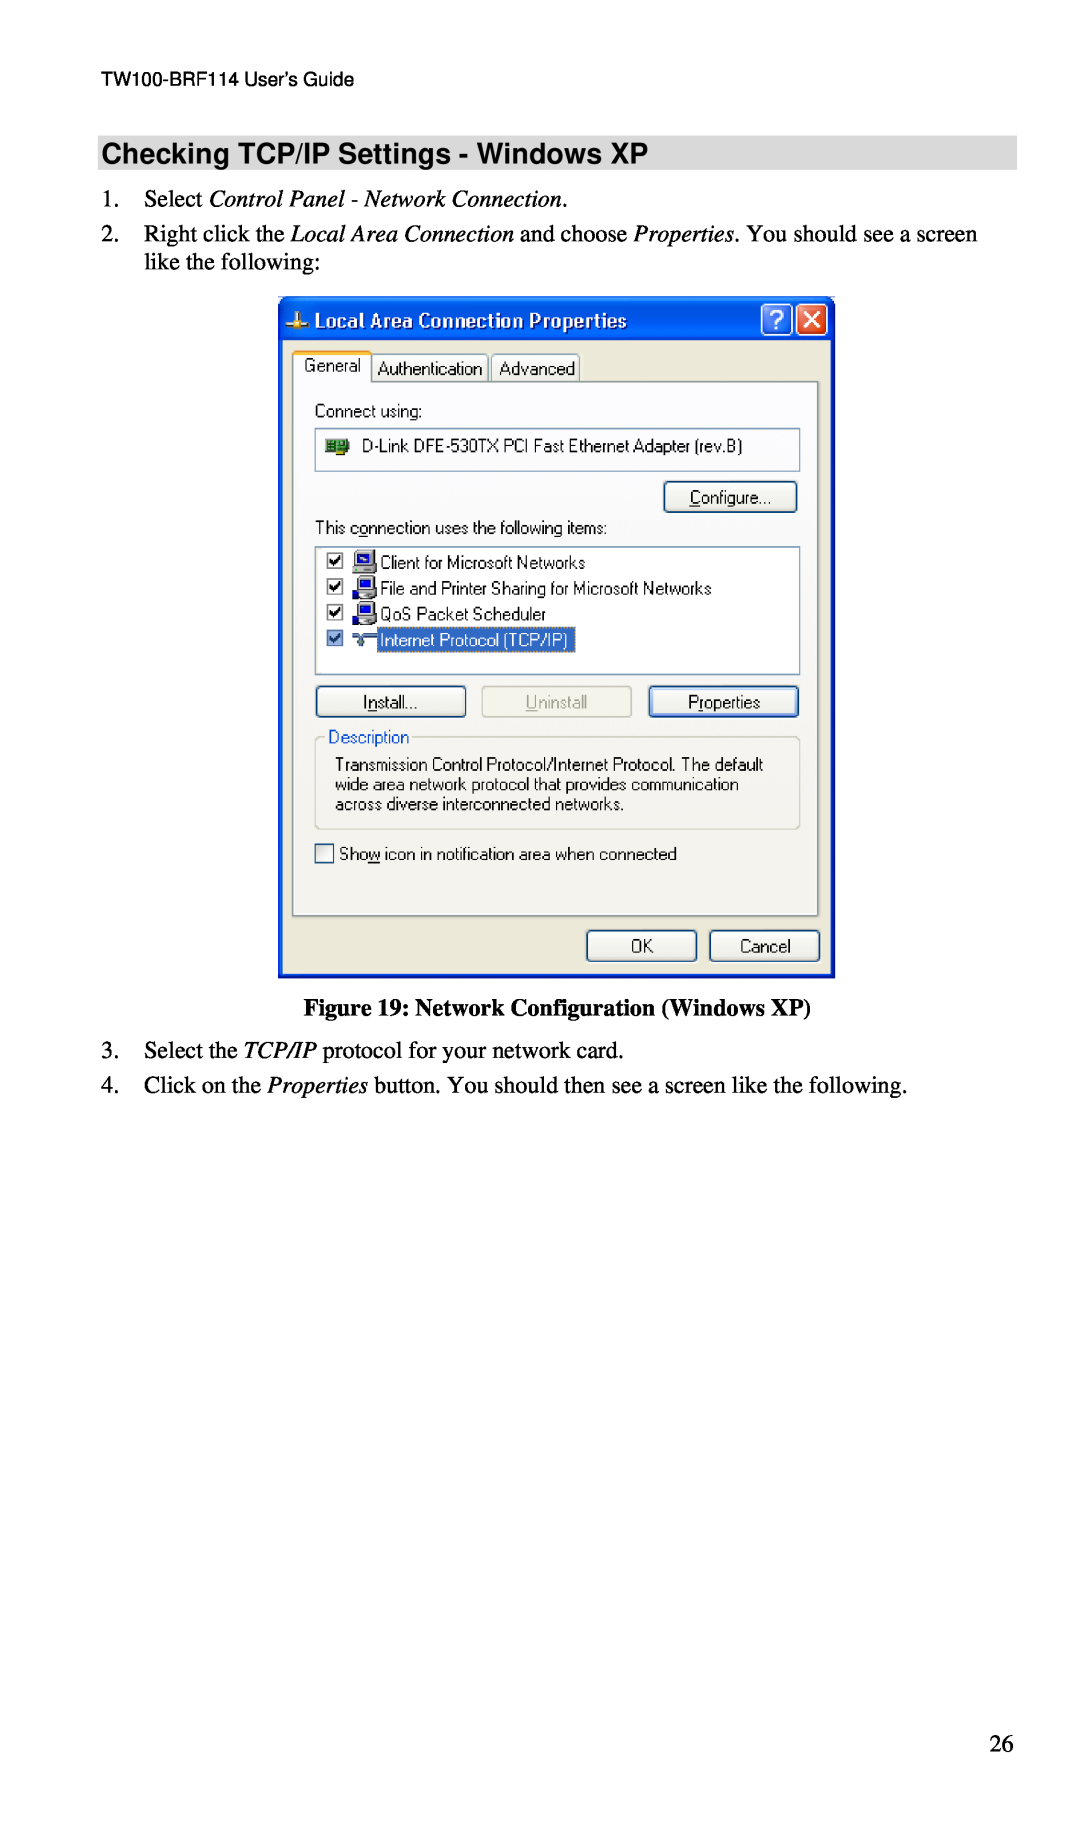 TRENDnet BRF114 manual Checking TCP/IP Settings - Windows XP, Select Control Panel - Network Connection 